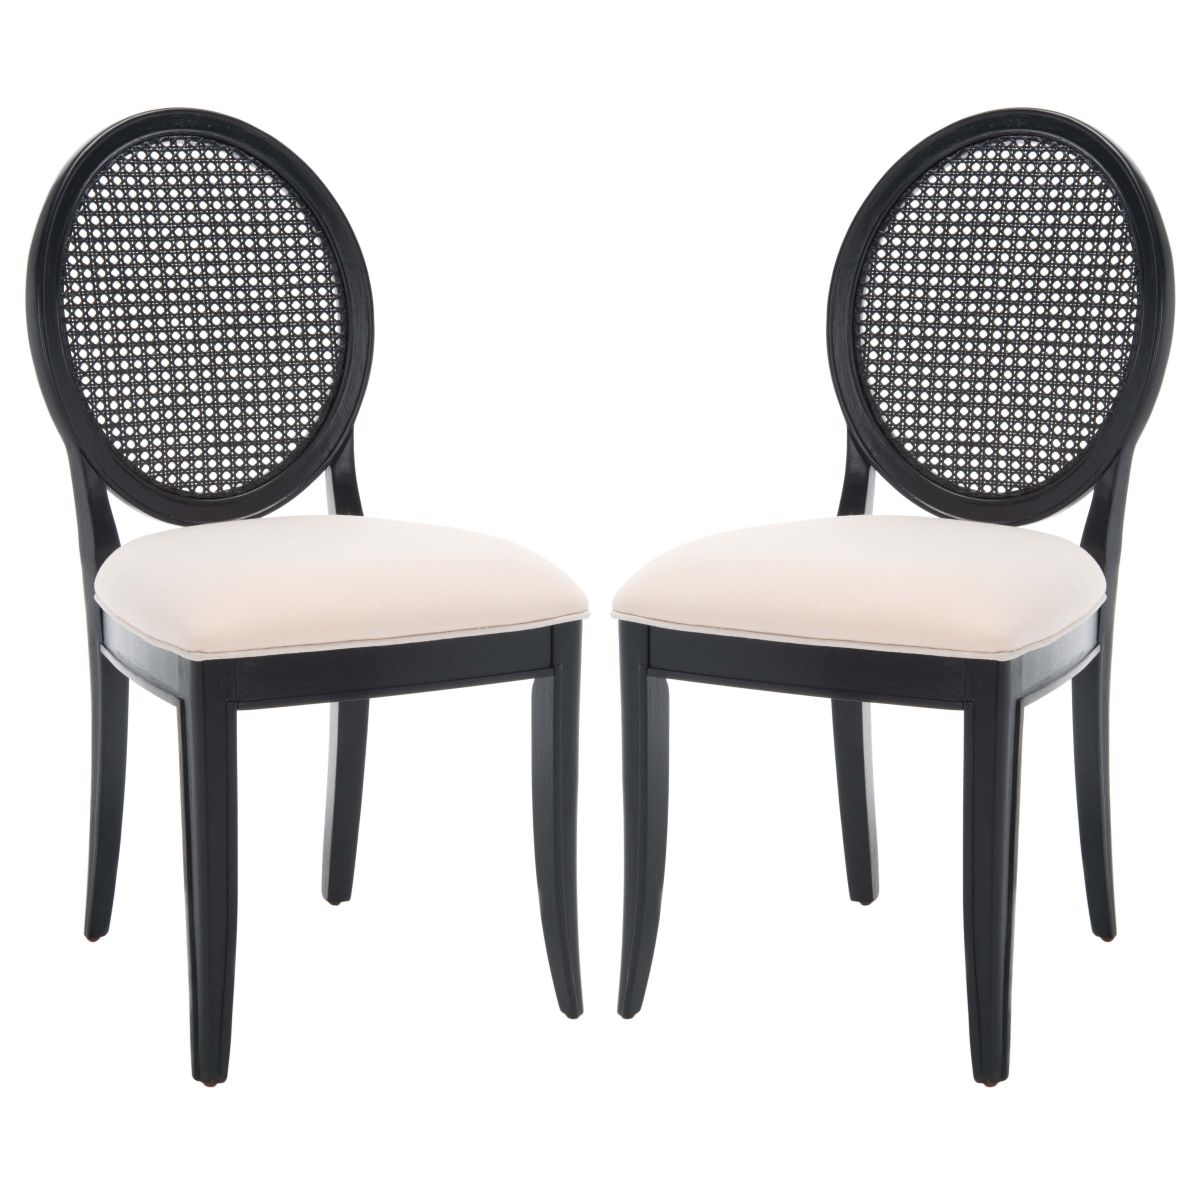 Safavieh Couture Karlee Rattan Back Dining Chair (Set of 2)